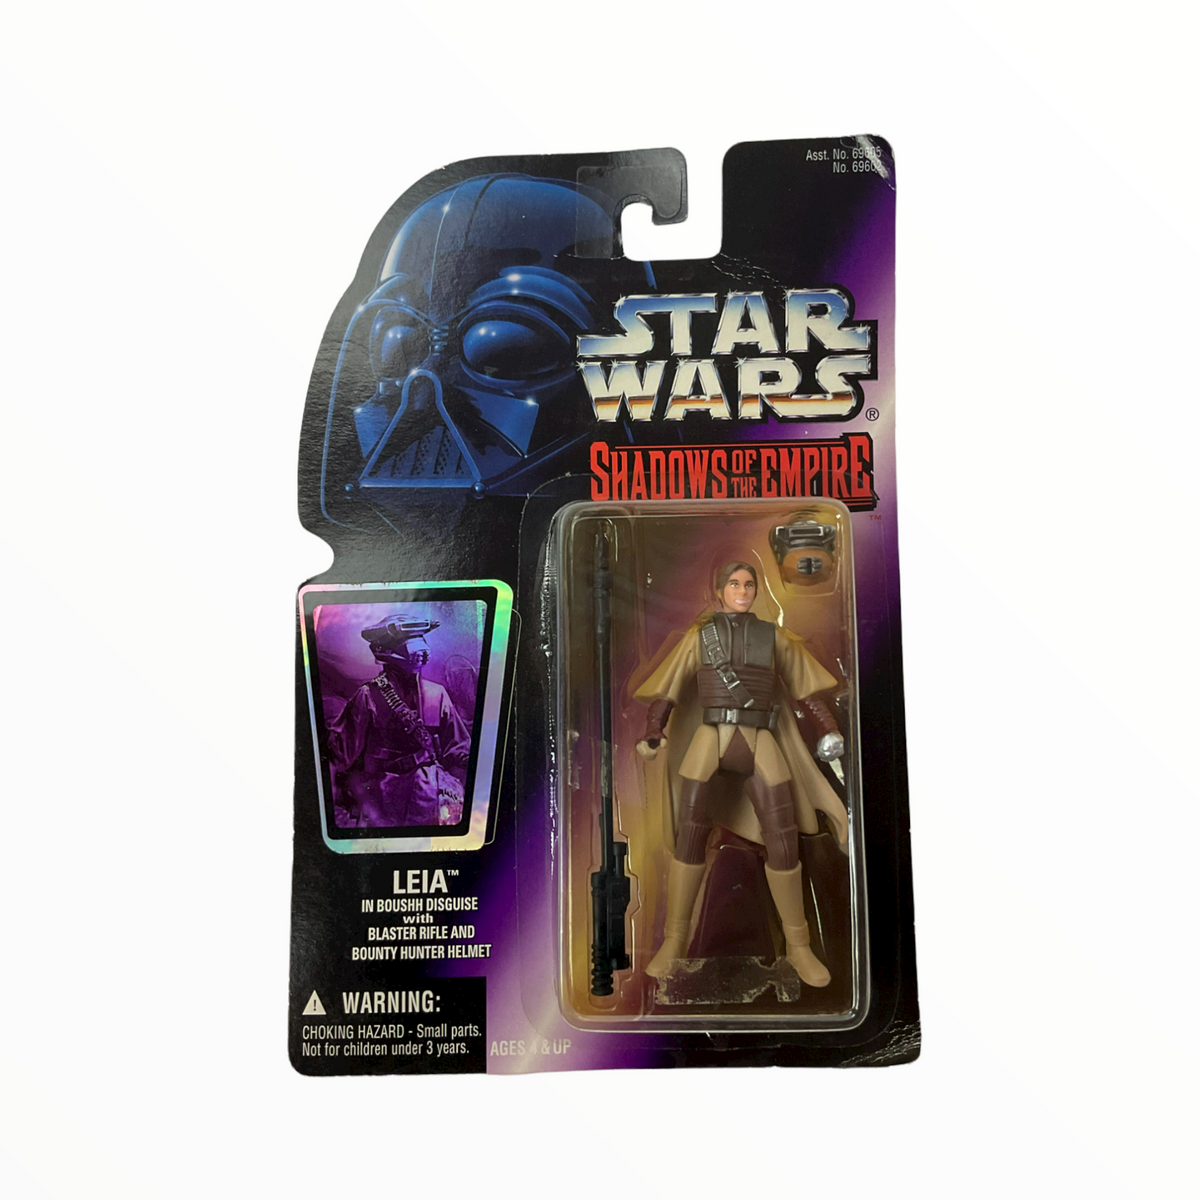 Star Wars Shadows Of The Empire (Princess) Leia In Boushh Disguise Action Figure 3.75 Inches